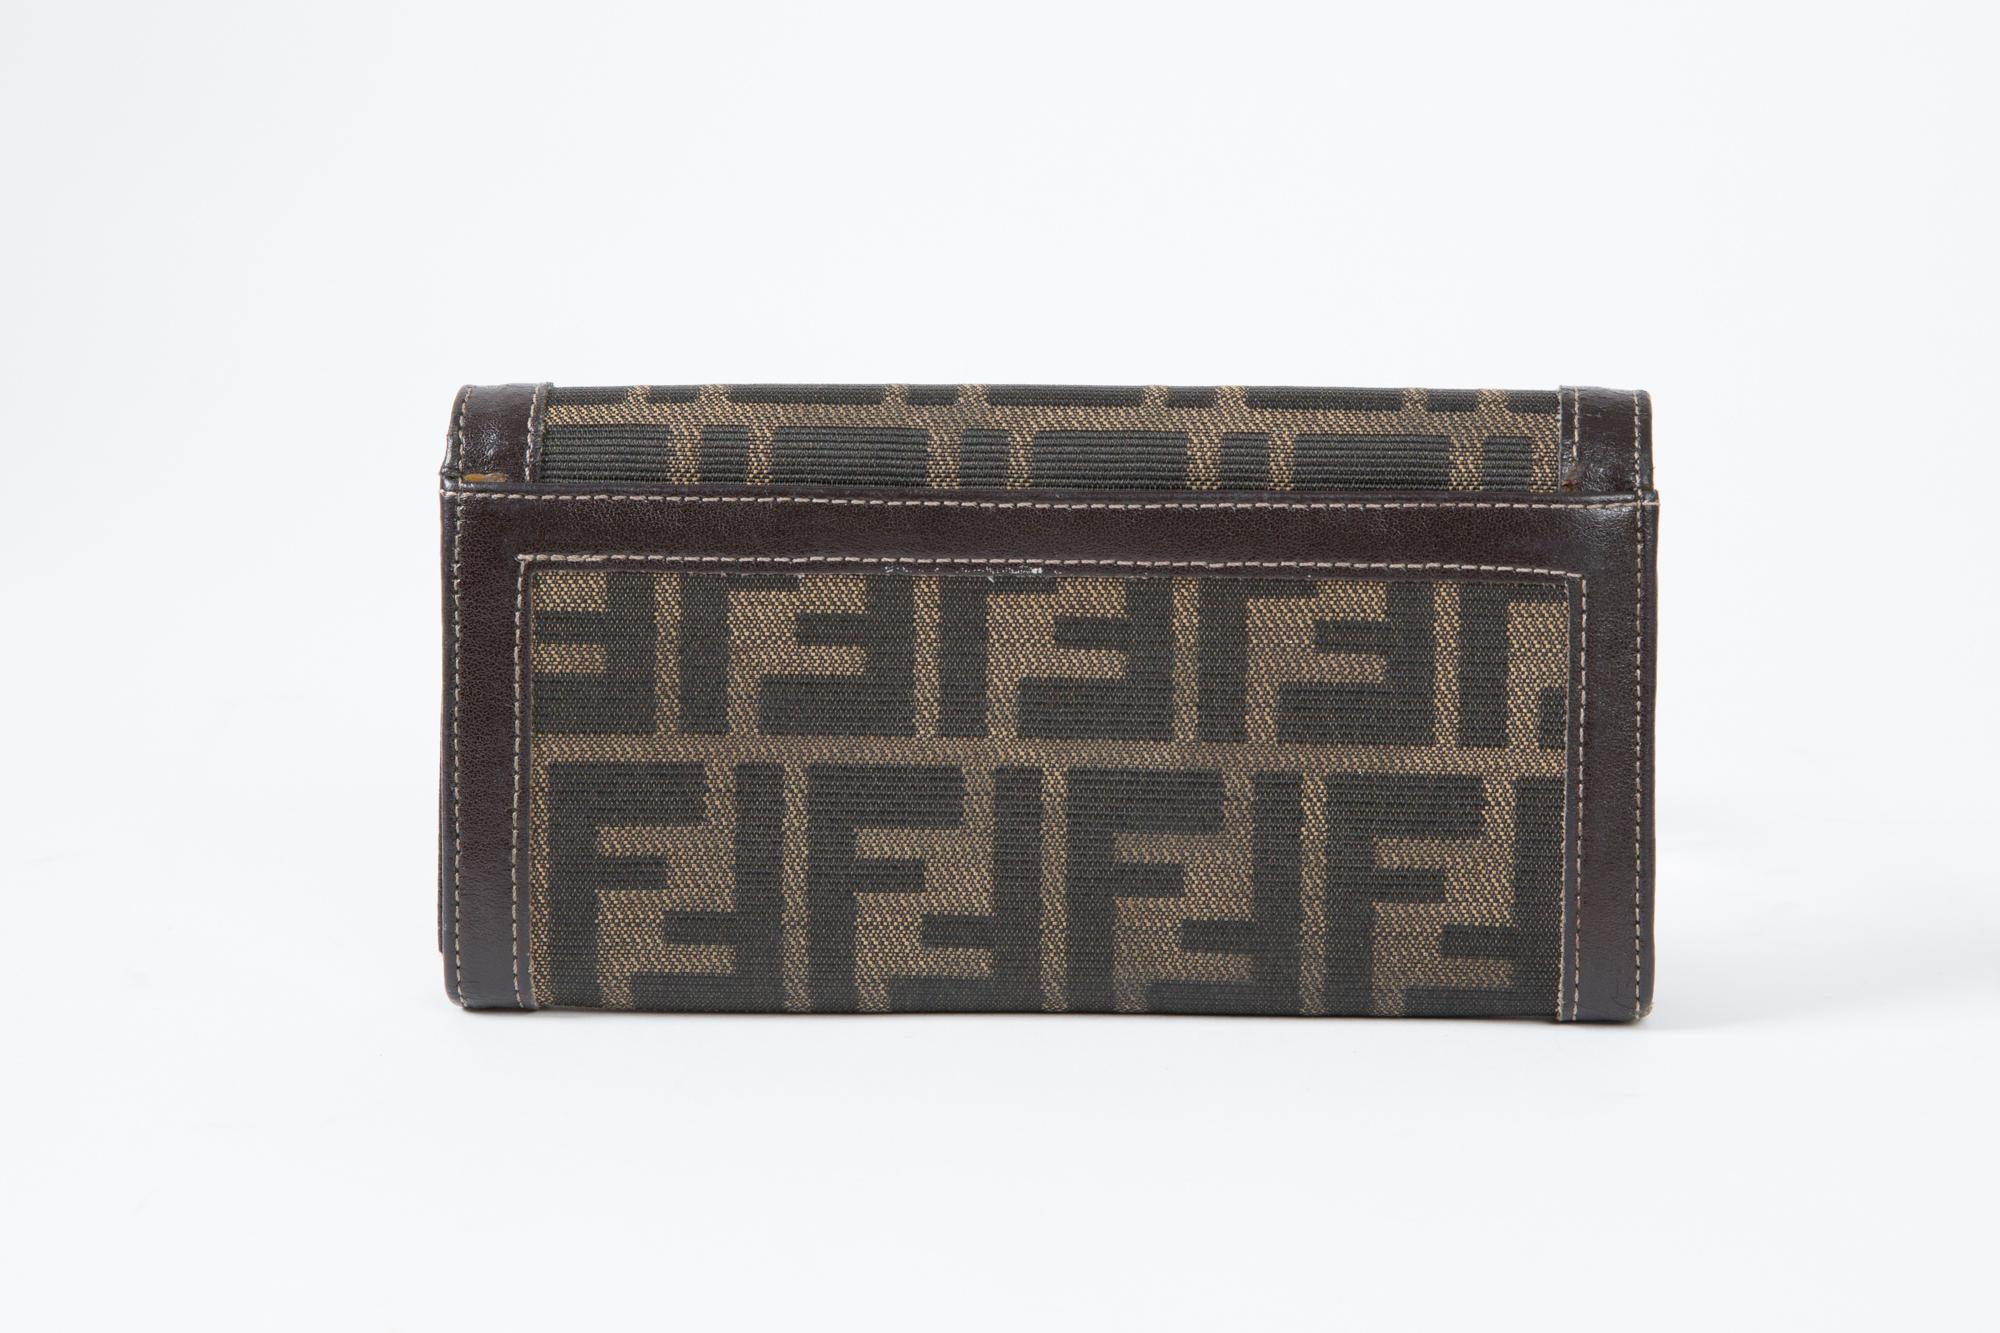 1980s Fendi brown and black canvas and leather monogram logo Zucca pattern wallet featuring an all over logo pattern, brown leather details, inside compartment, an inside gold tone logo stamp.  Circa 1980. 
Width 7in. (18cm)
Height closed 3.5in.